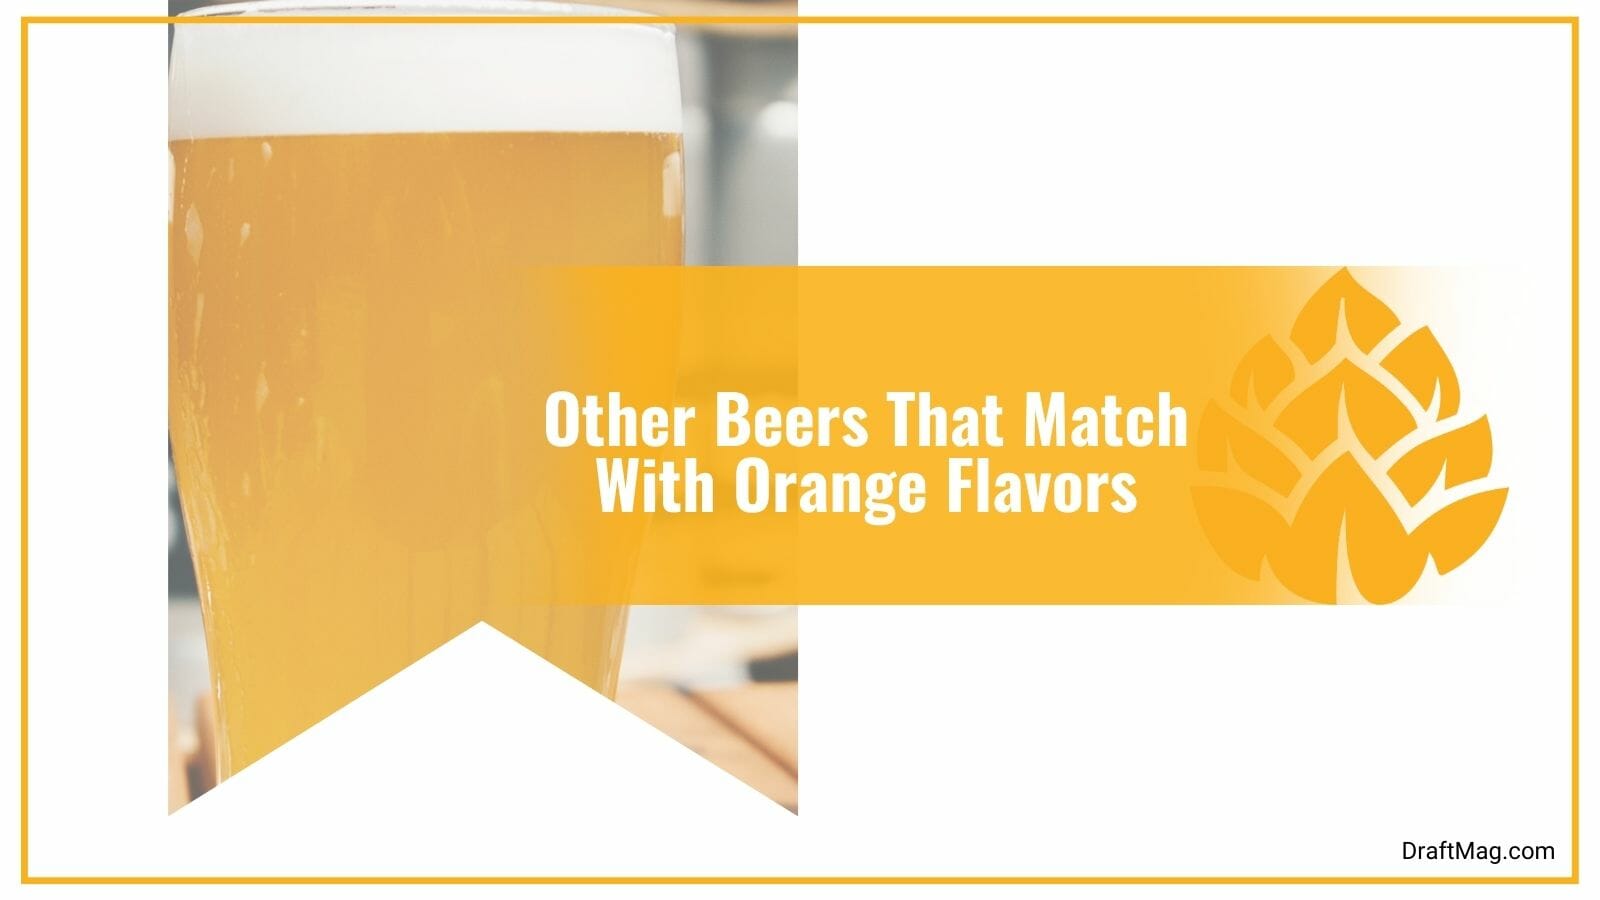 Other Beers That Match With Orange Flavors